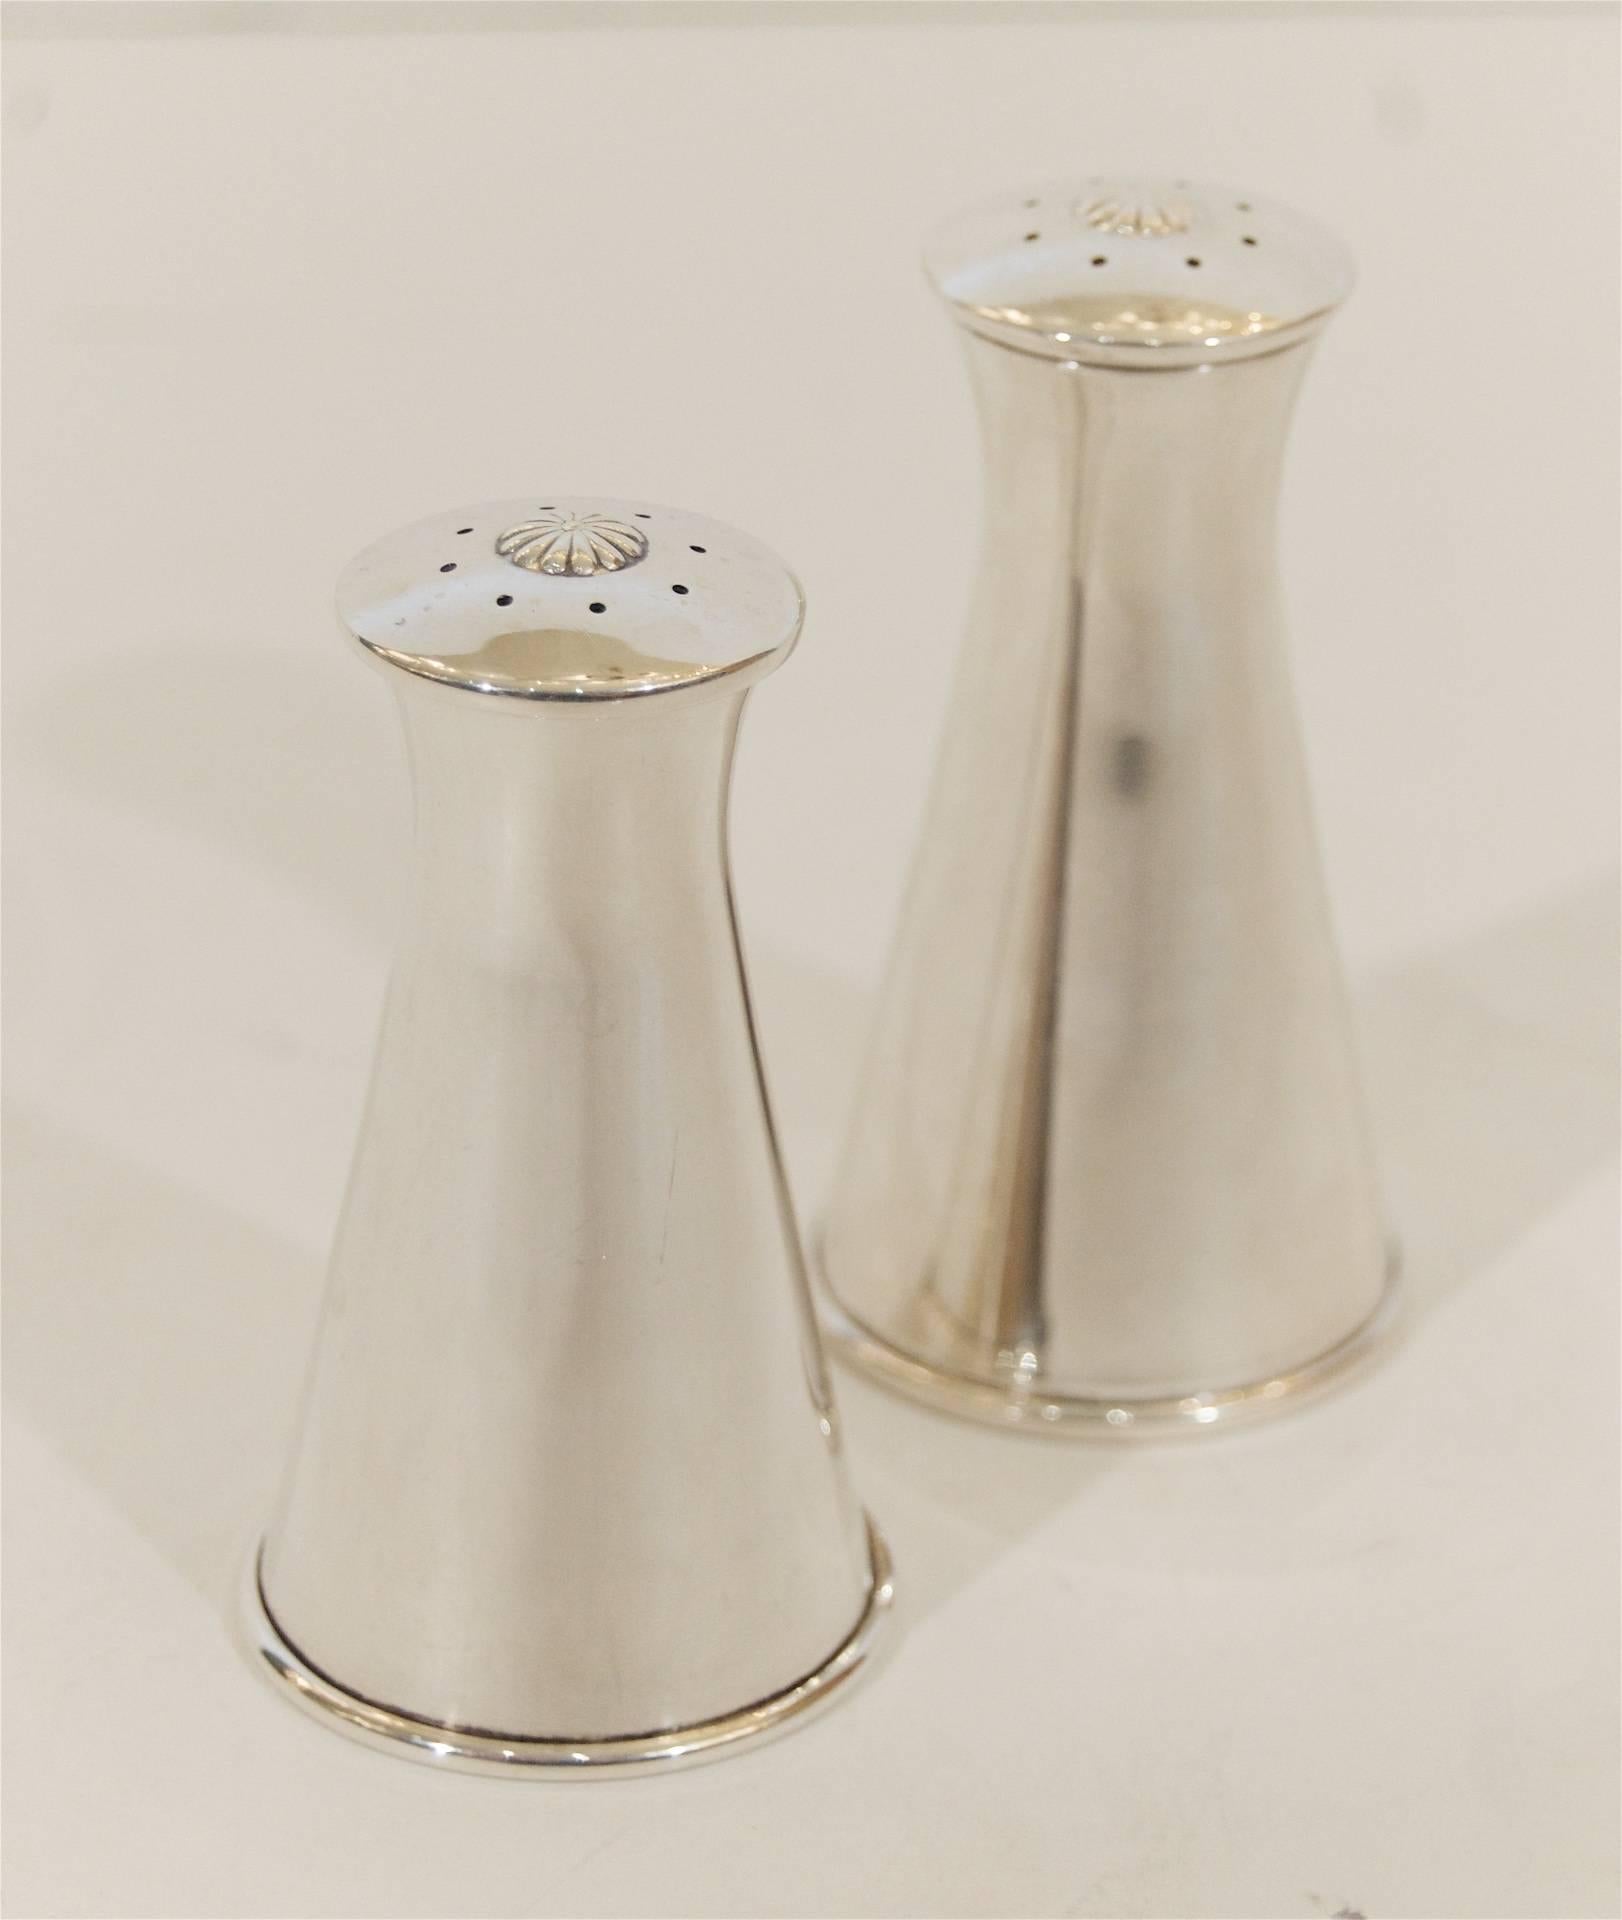 A pair of midcentury Reed & Barton matched salt and pepper shakers in sterling silver, an elegant profile of concave and convex curves. Floral detail on top of both shakers. Pattern X33.